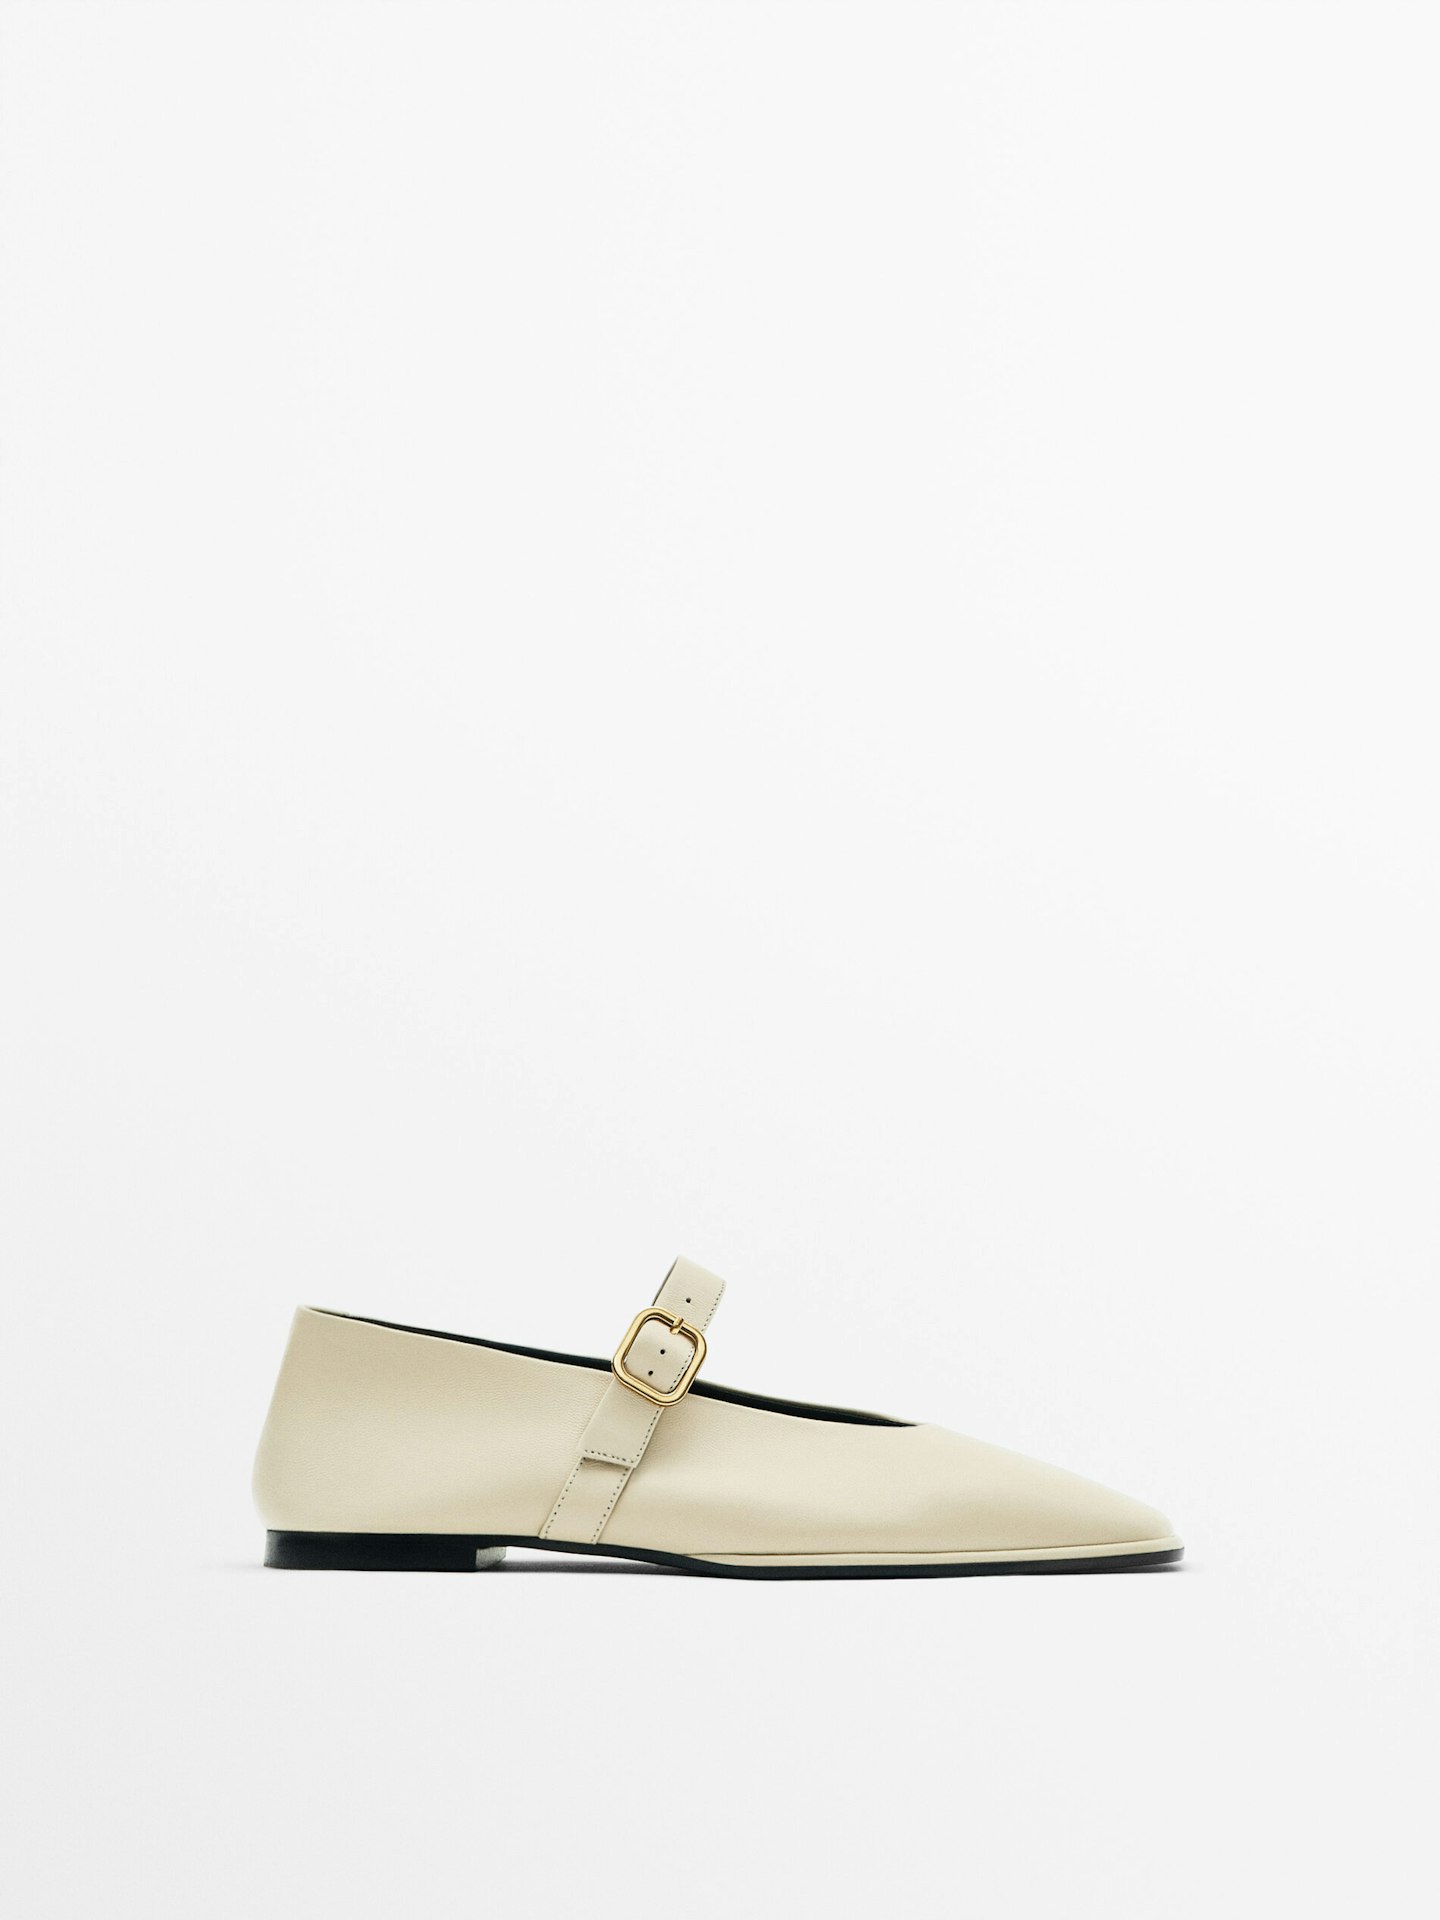 Massimo Dutti, Square Ballet Flats With Buckled Strap